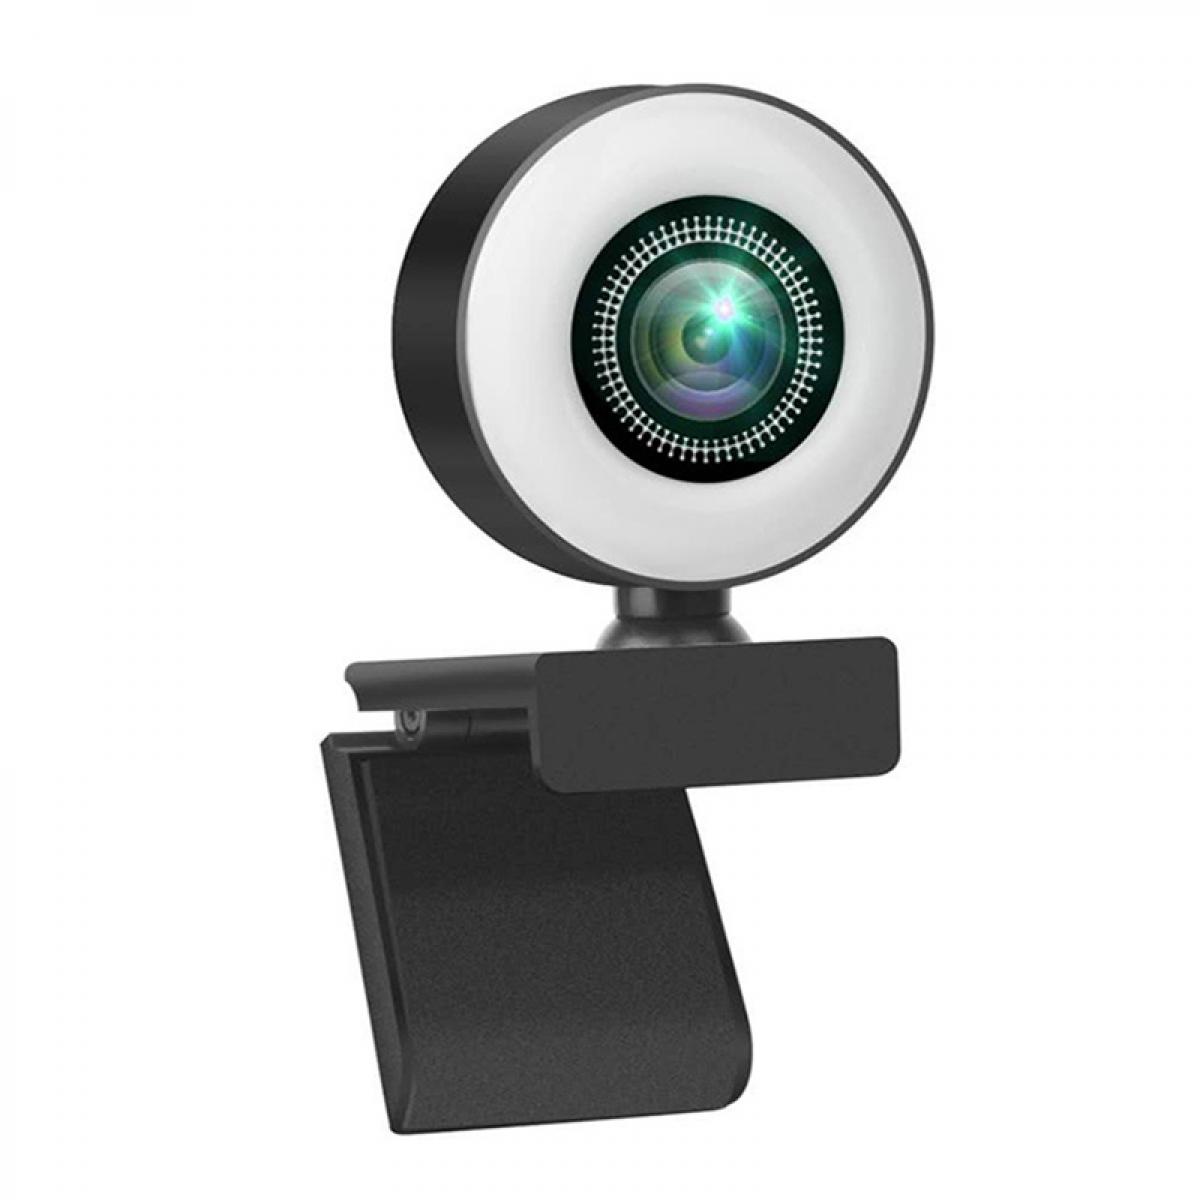 USB Webcam for Laptop and PC from Diamond Mutimedia